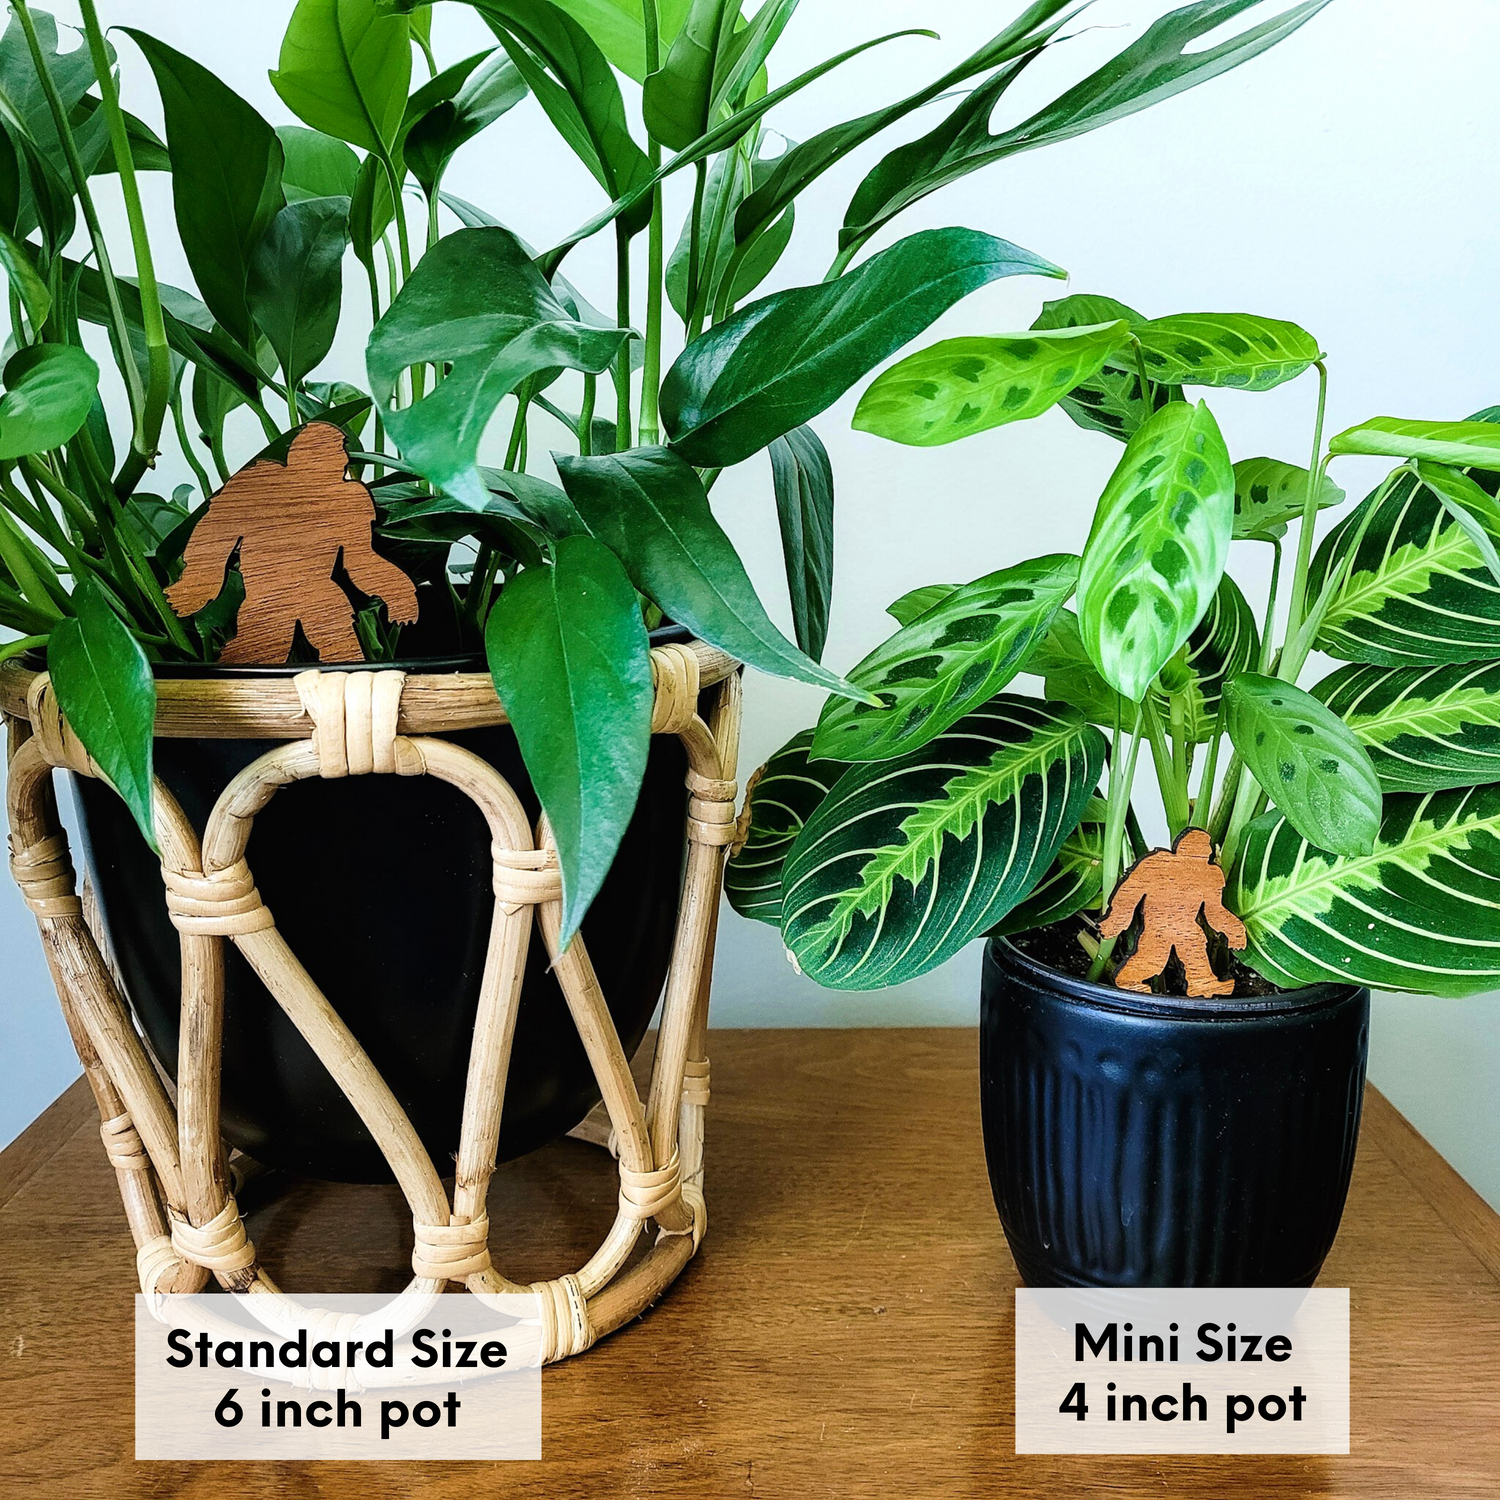 Wooden bigfoot decorative plant stakes in both size options displayed in houseplant pots.